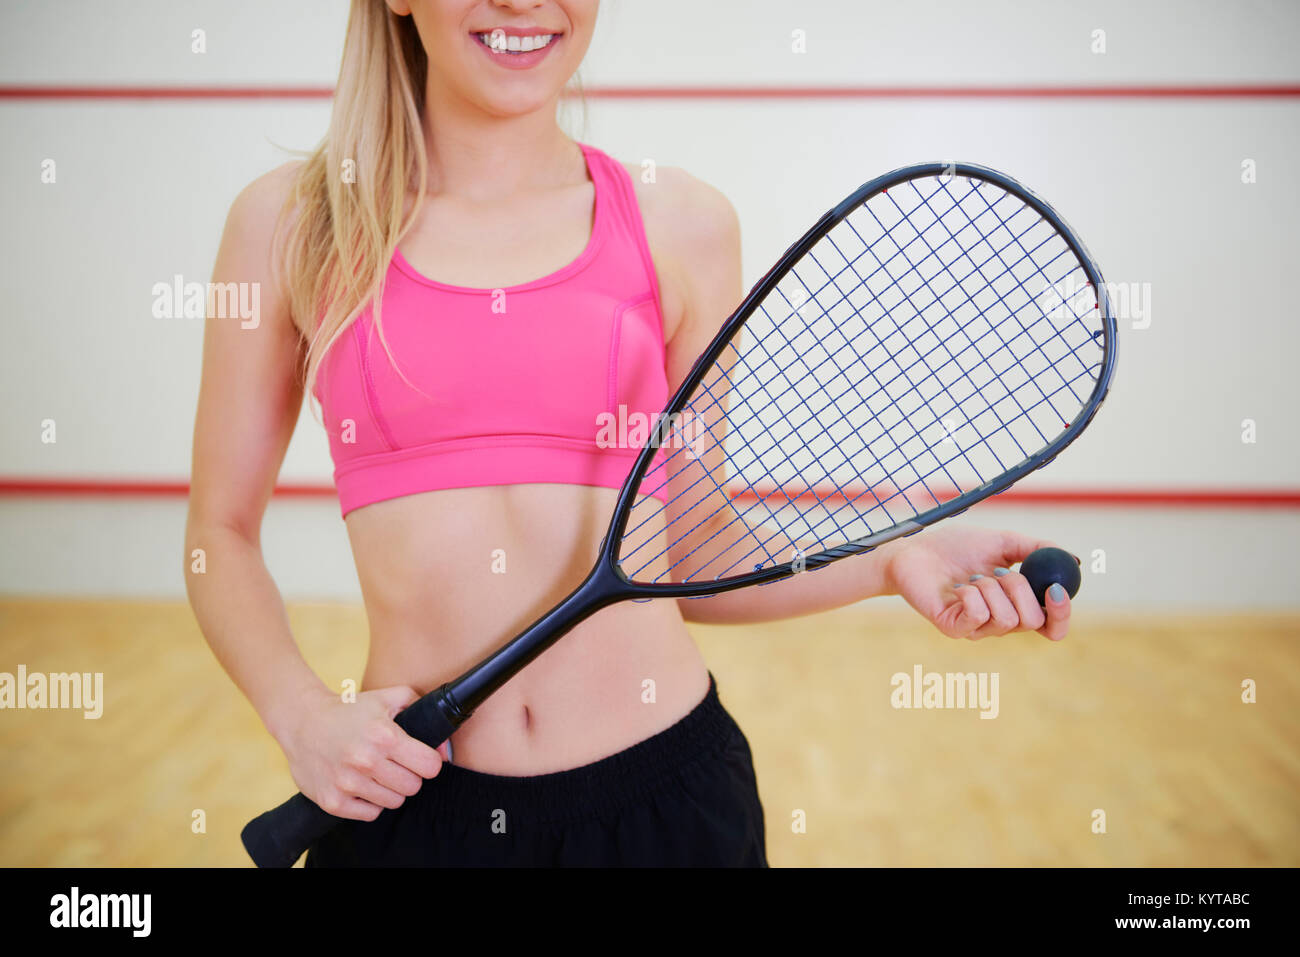 Unrecognizable squash player with racket Stock Photo